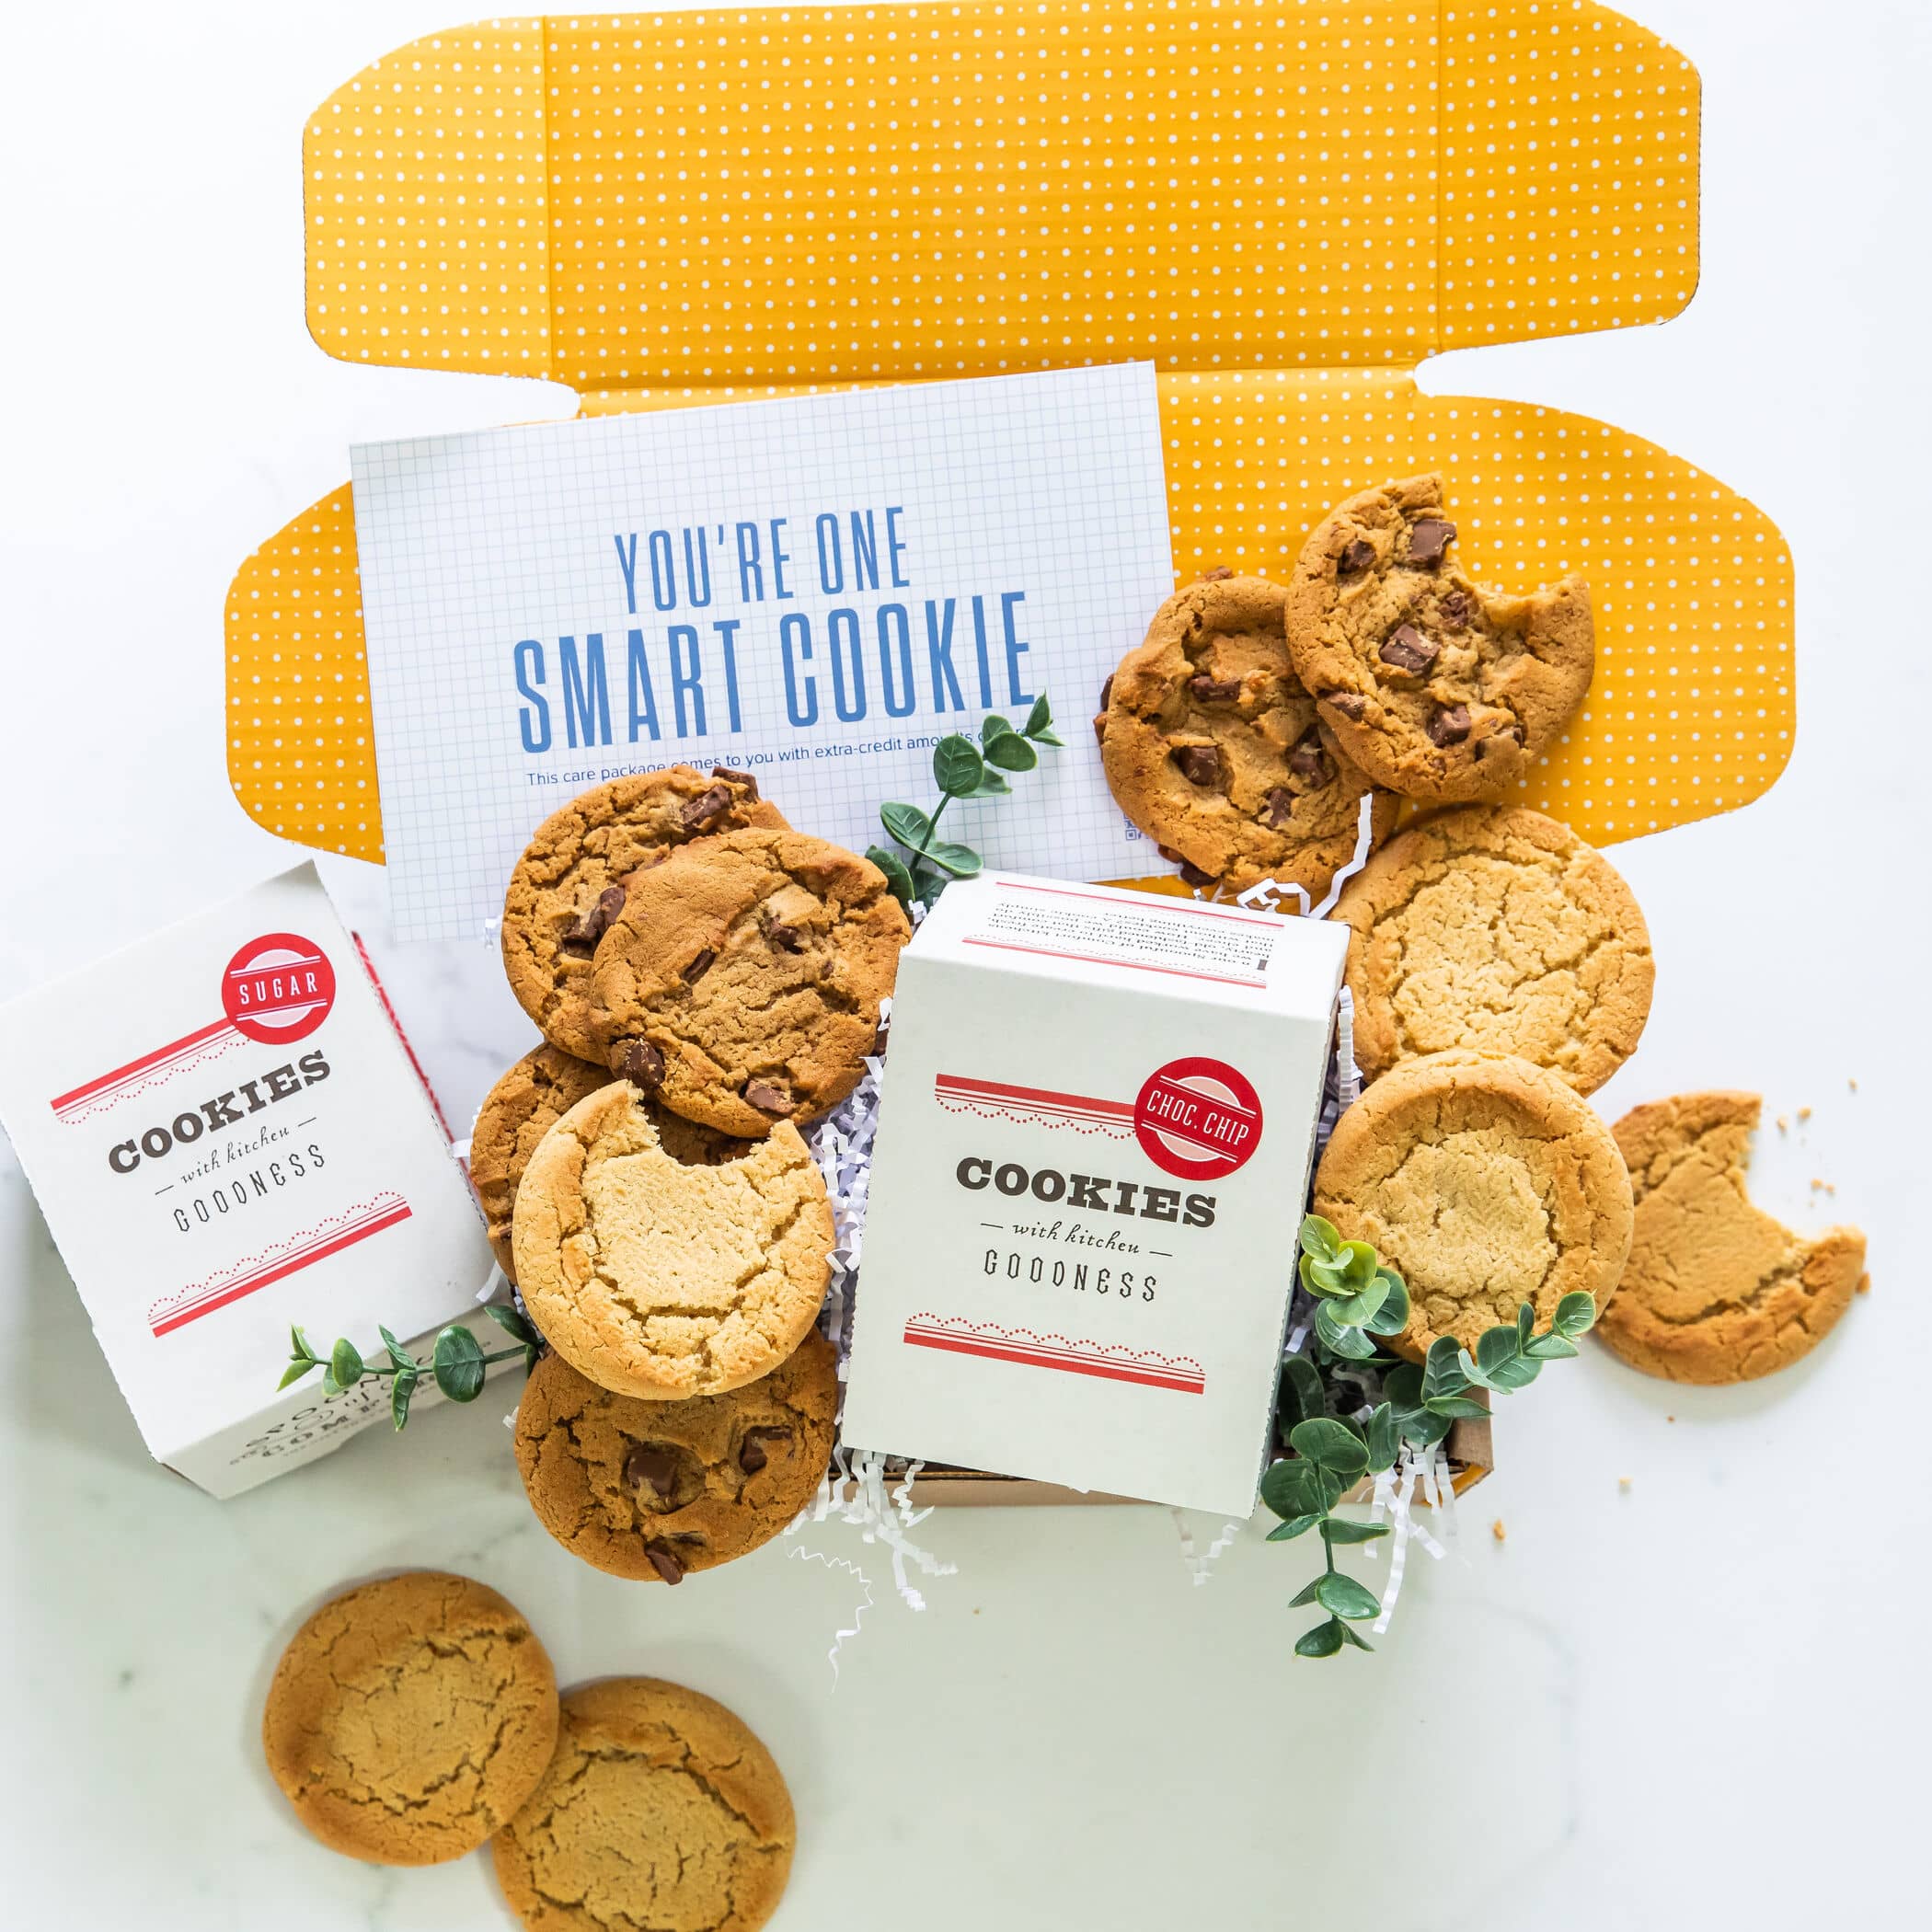 Smart Cookie Package Photo